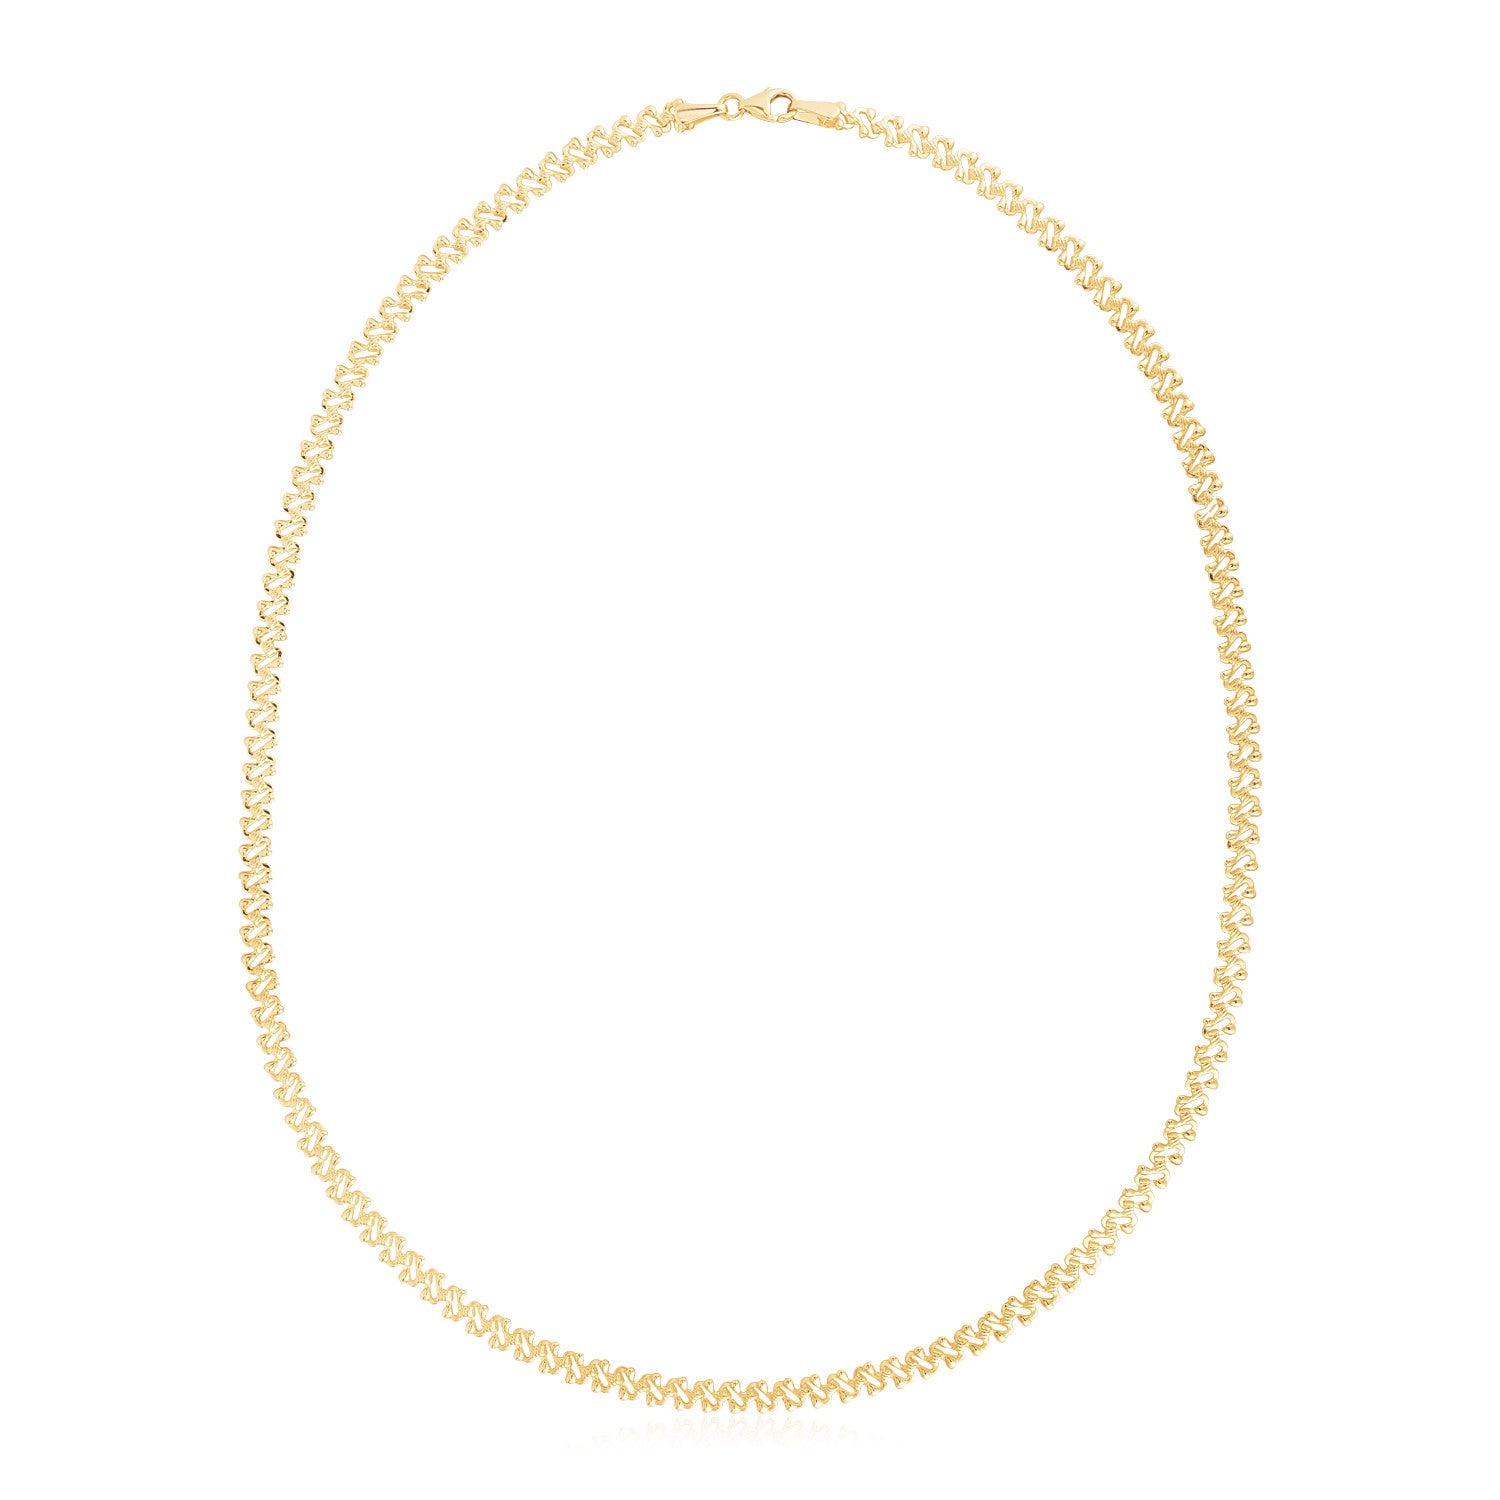 14K Yellow Gold High Polish The Textured Fancy Chain Necklace 4Mm 75356-1